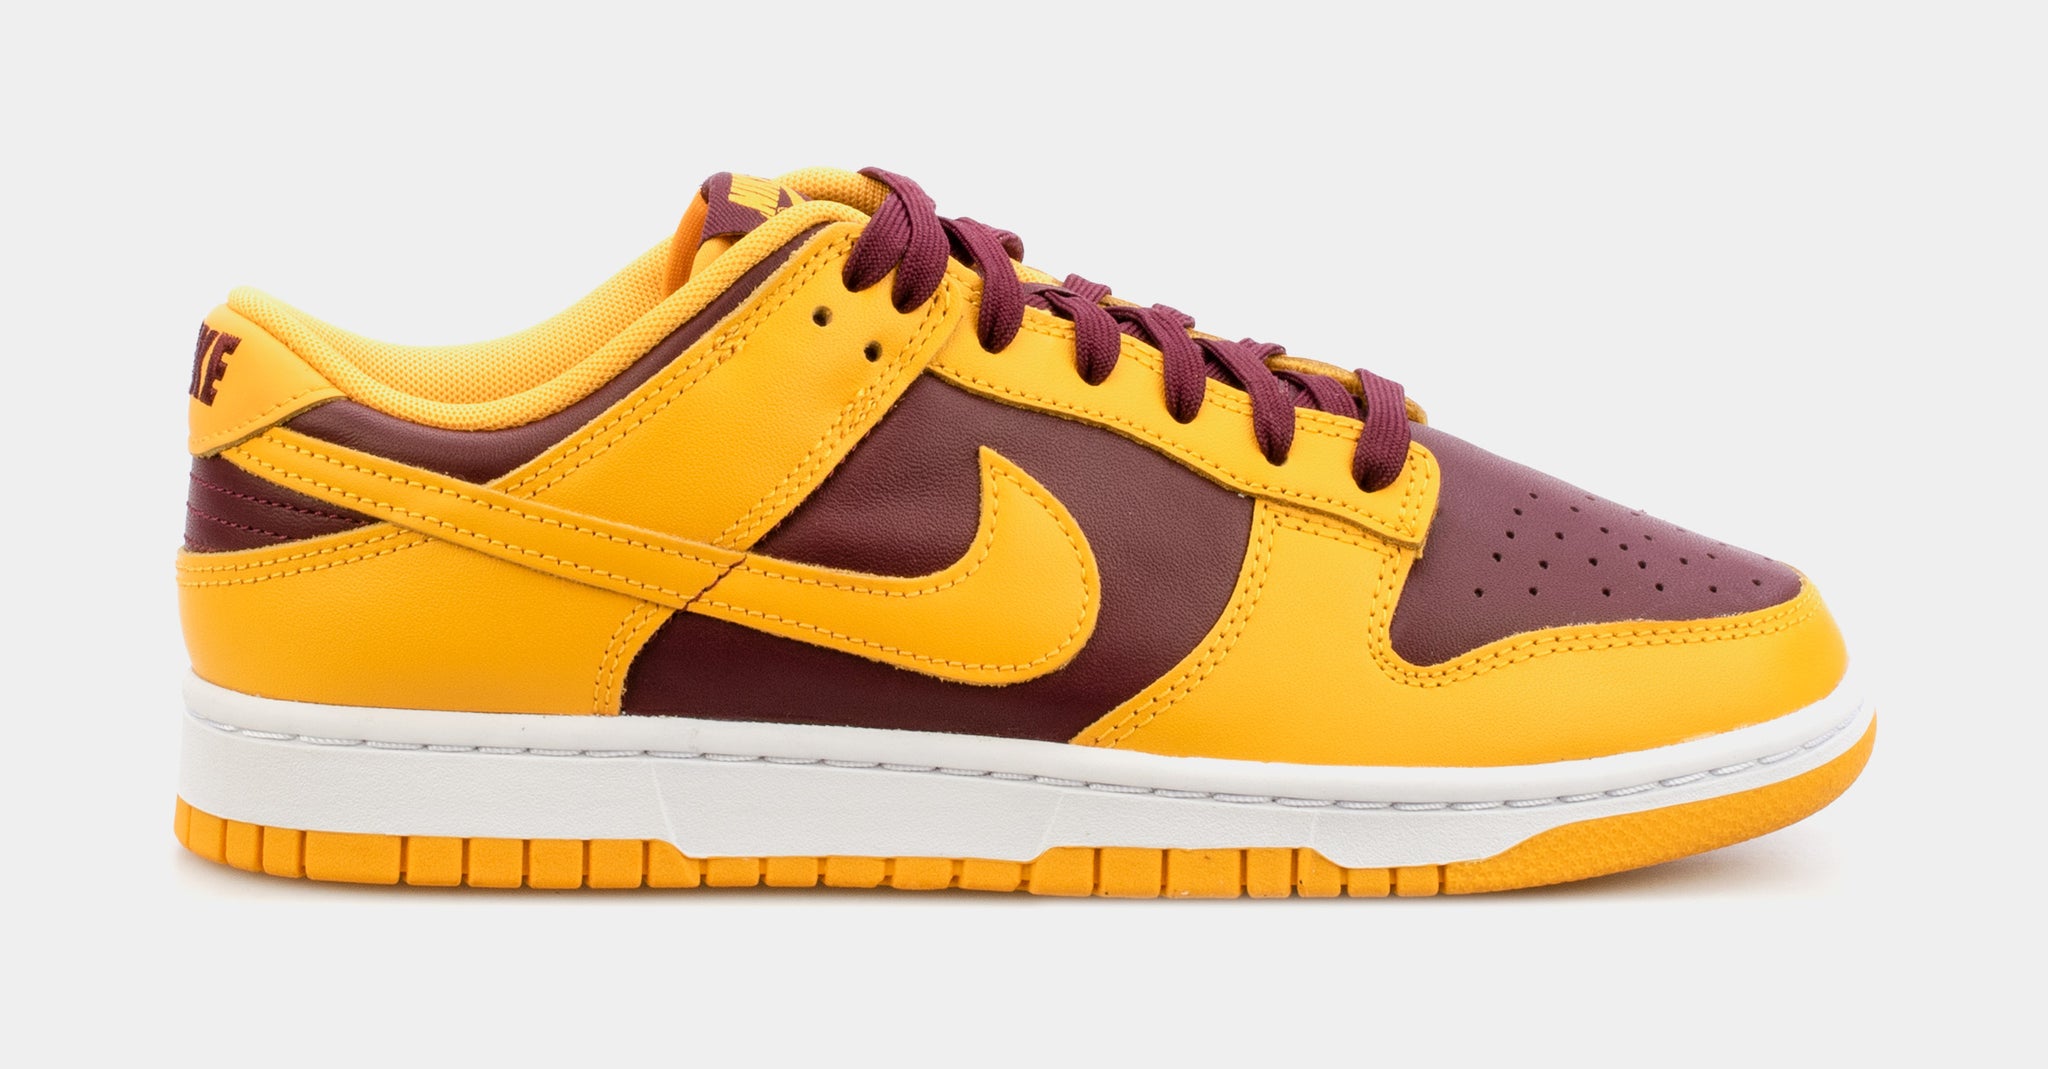 Nike Dunk Low Yellow Bordeaux Mens Lifestyle Shoes Red Yellow